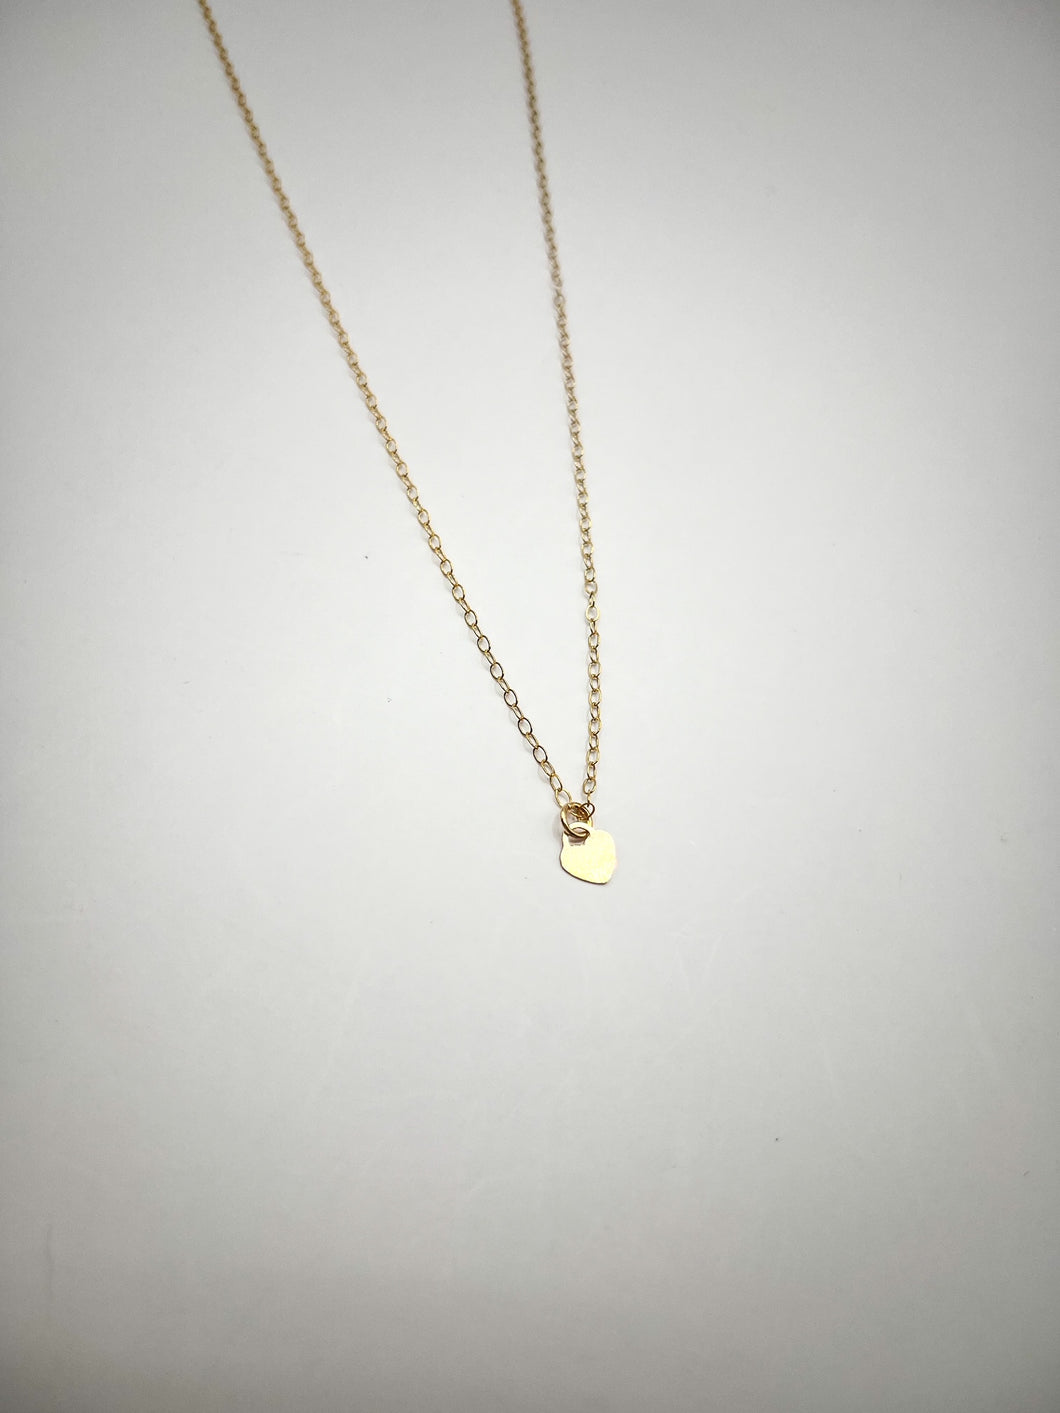 Mini Heart Charm Necklace - Gold Filled